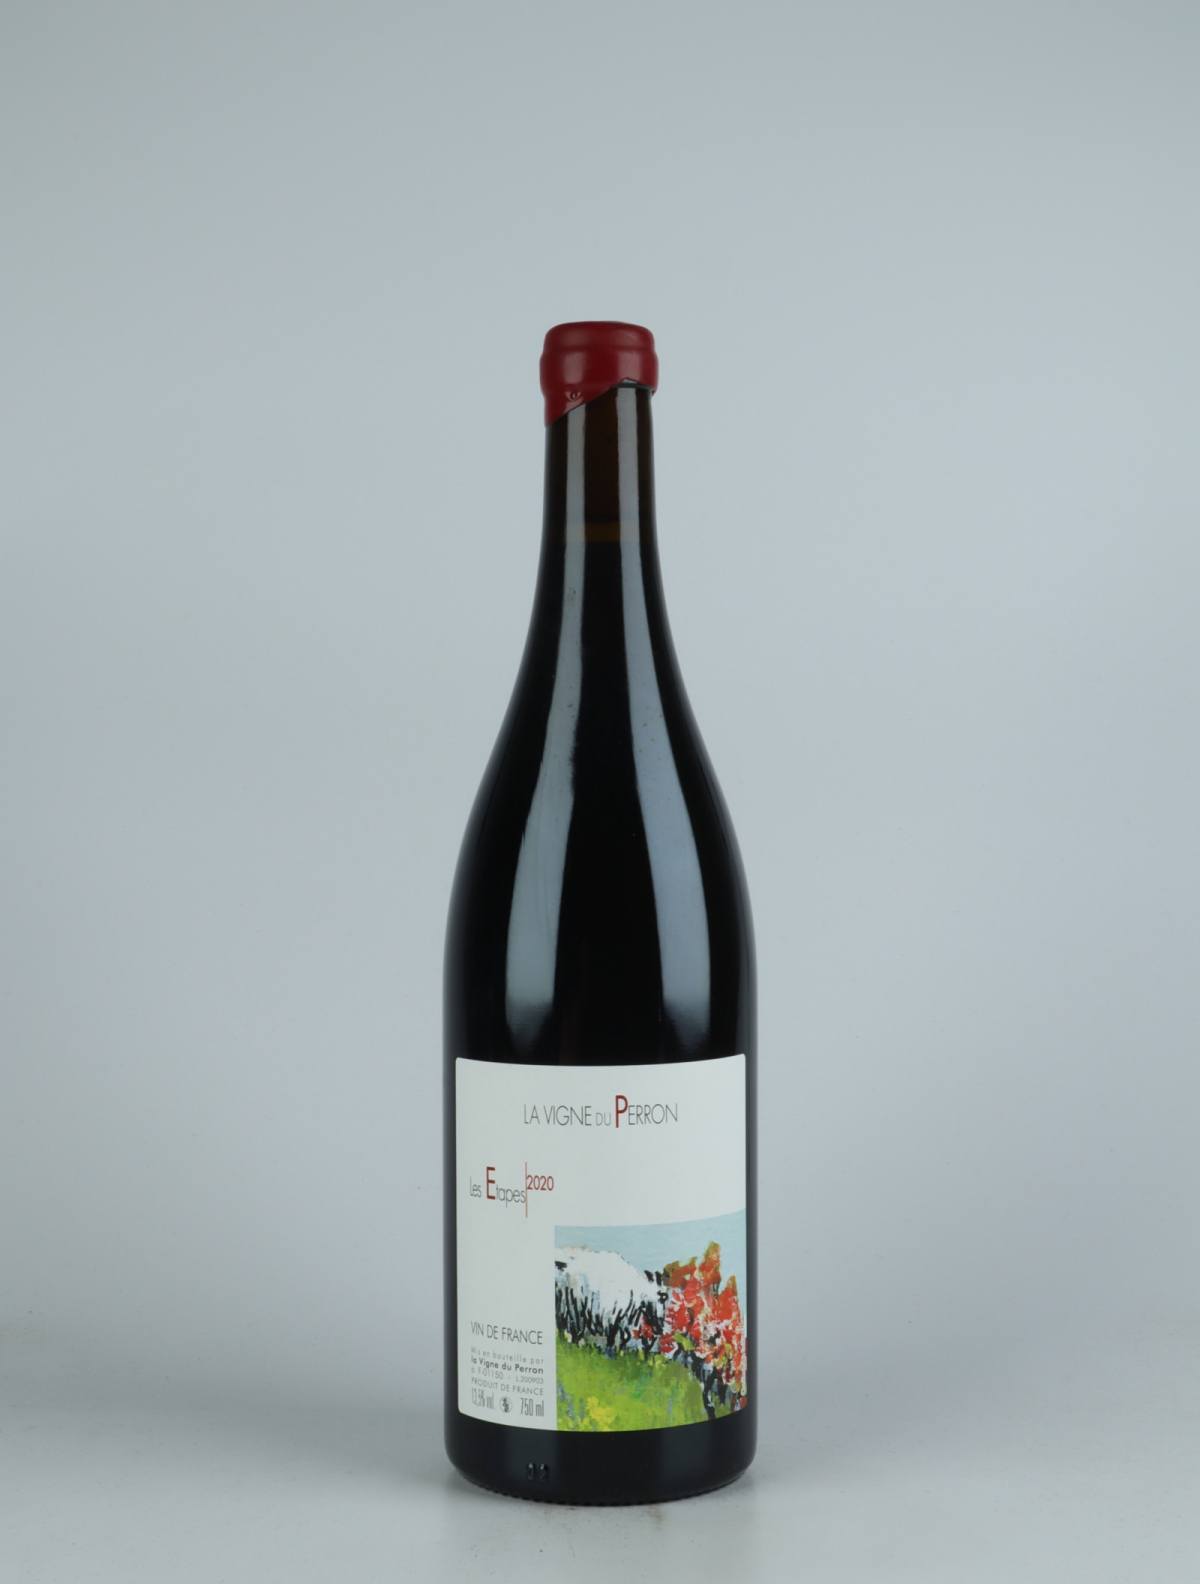 A bottle 2020 Etapes Red wine from Domaine du Perron, Bugey in France